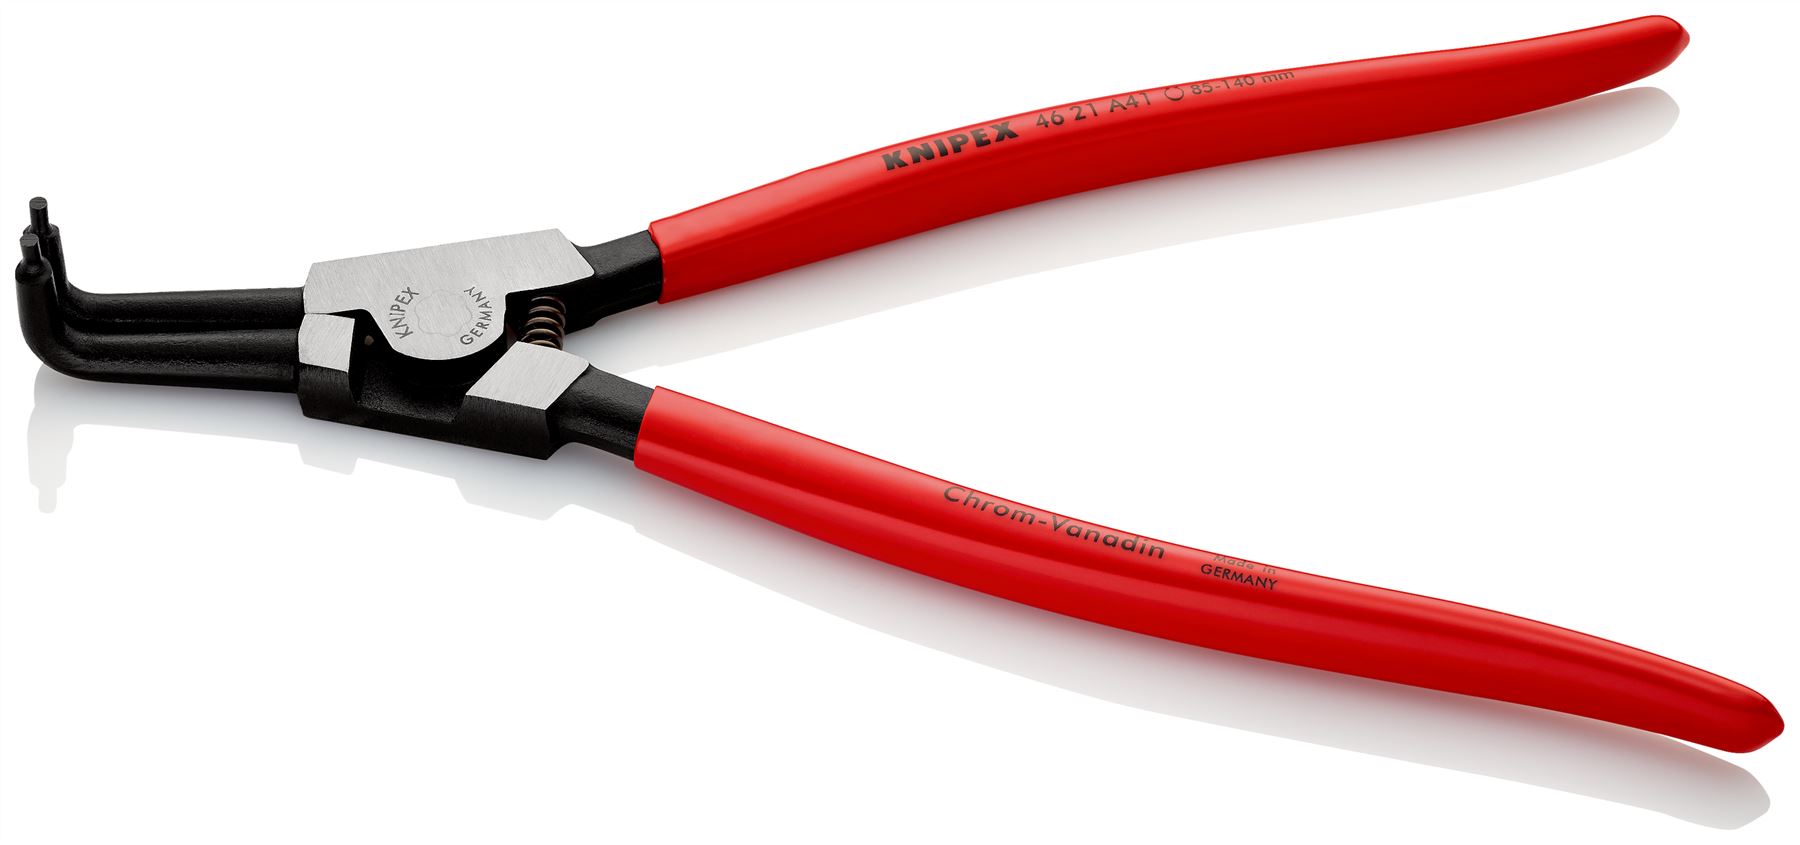 KNIPEX Circlip Pliers for External Circlips on Shafts 90° Angled 300mm 3.2mm Diameter Tips 46 21 A41